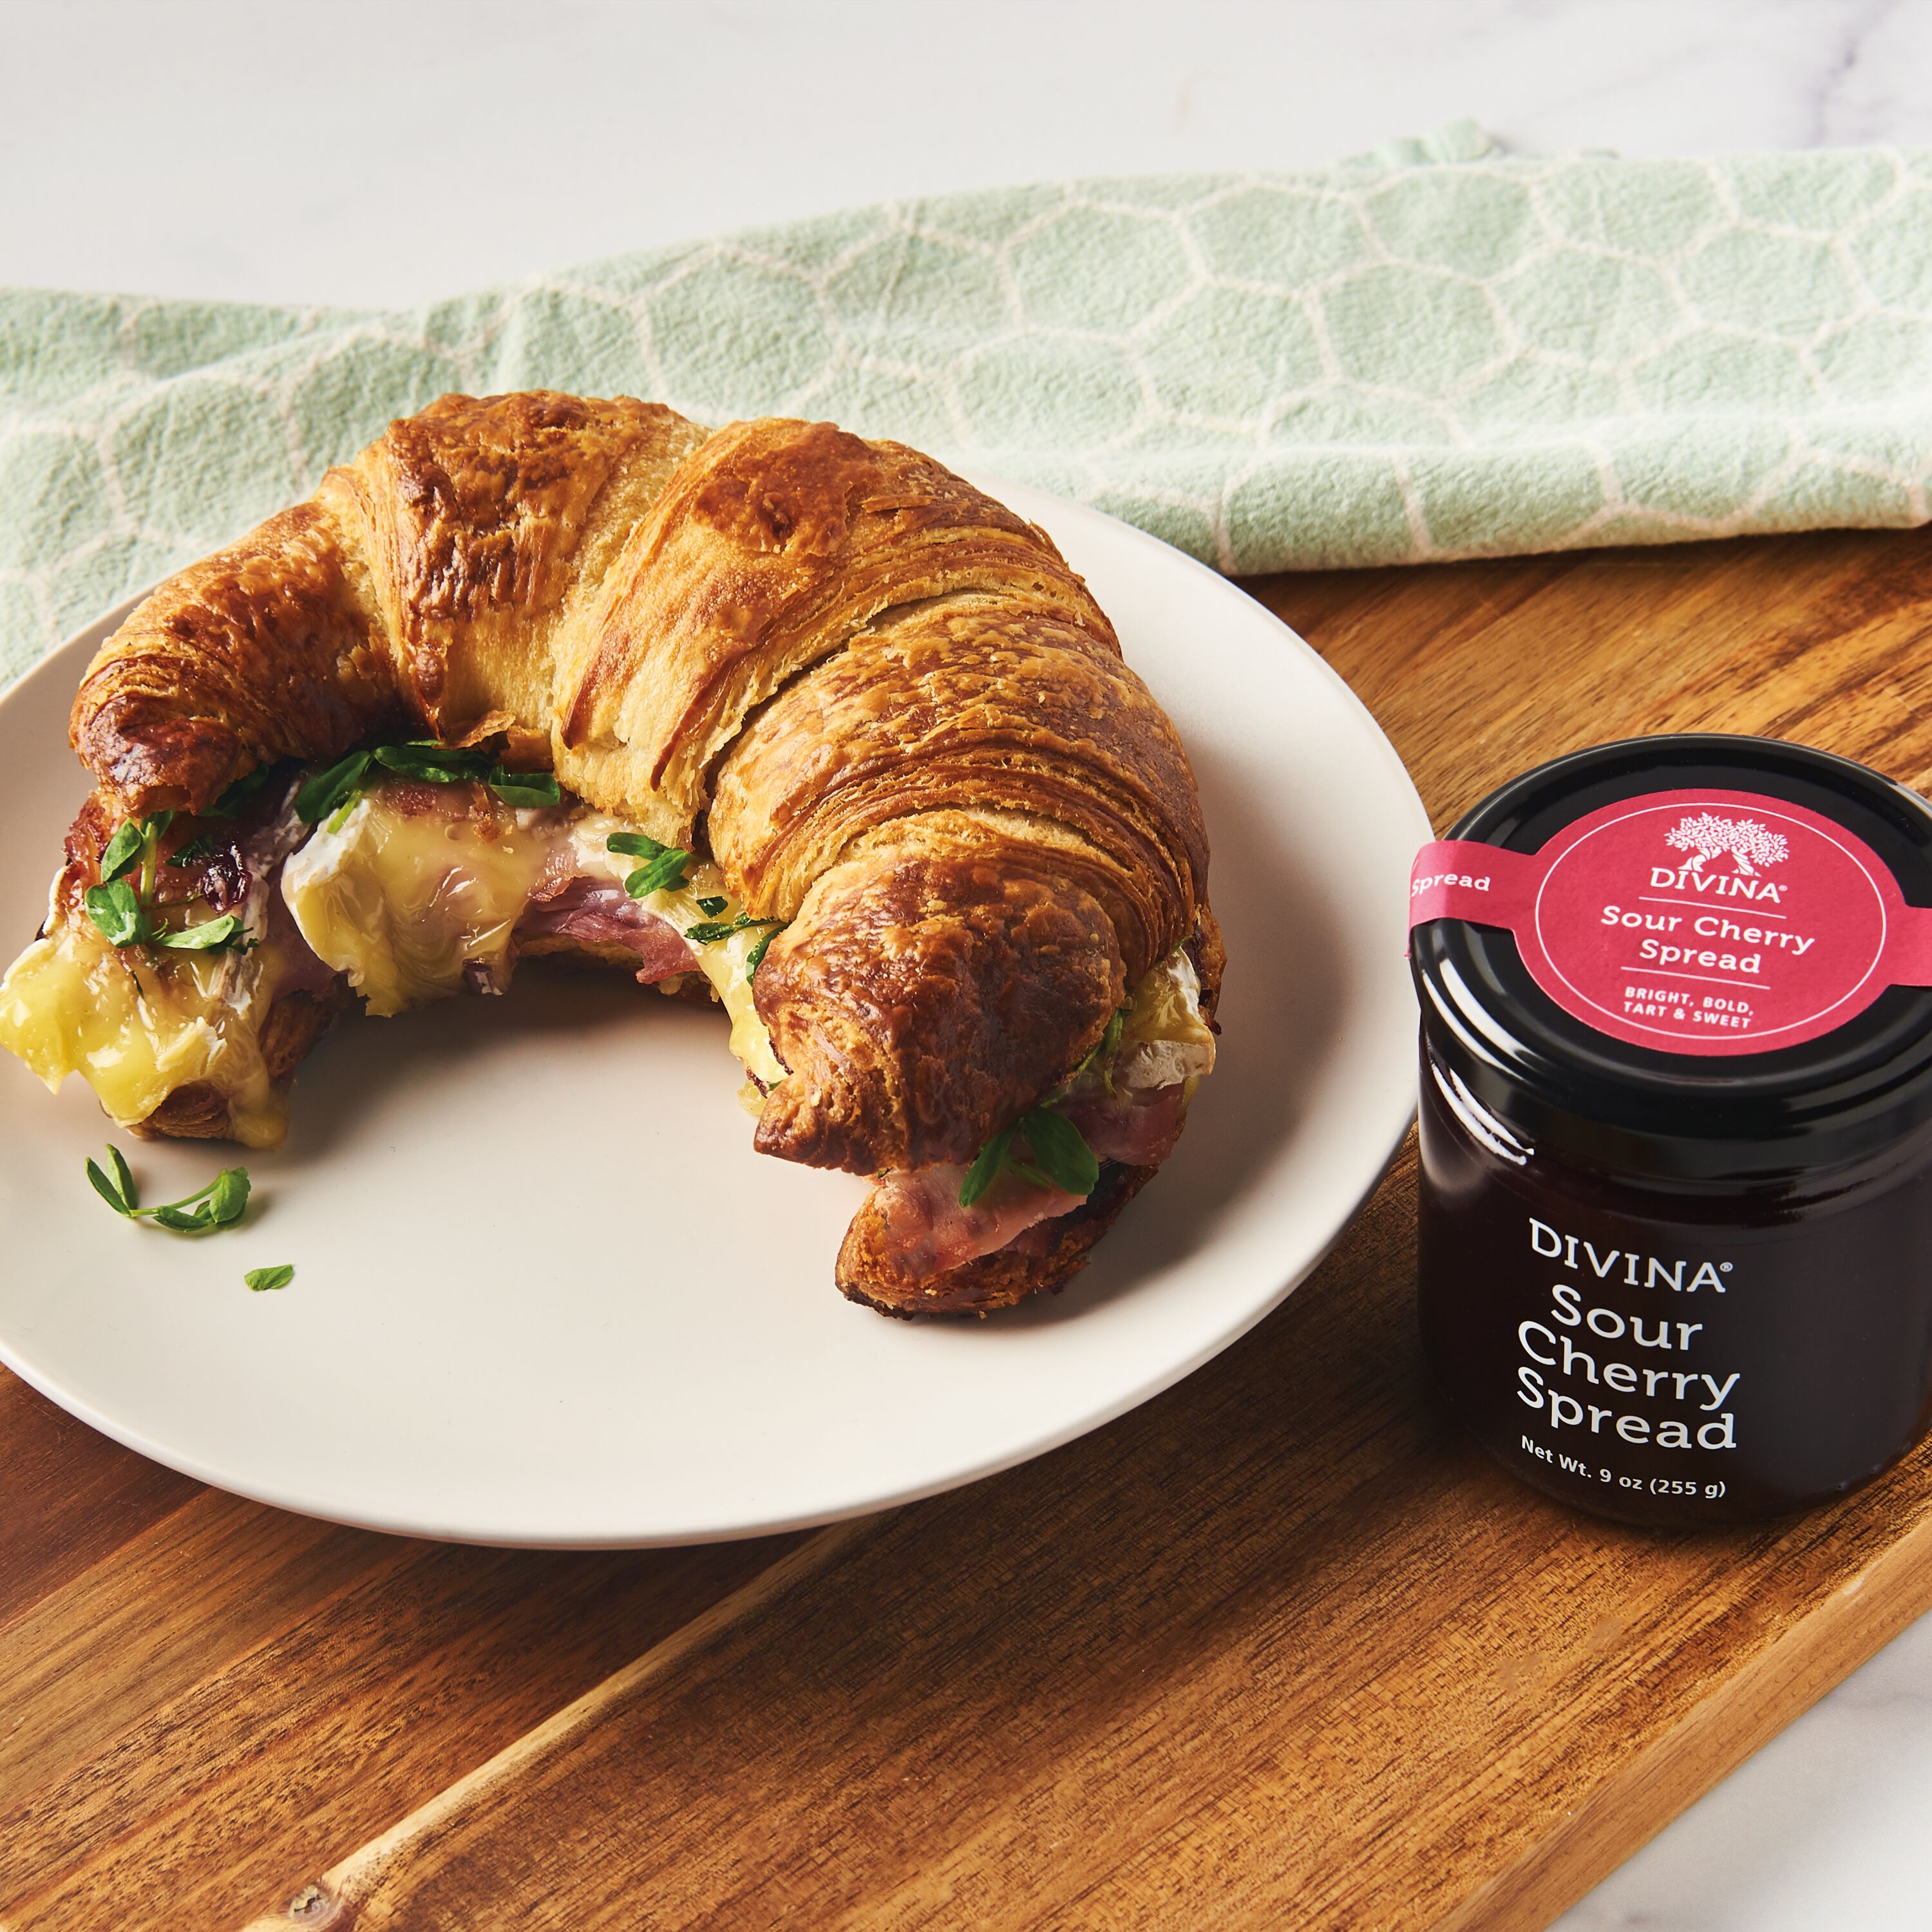 Ham and Brie Croissant Sandwich with Sour Cherry Spread